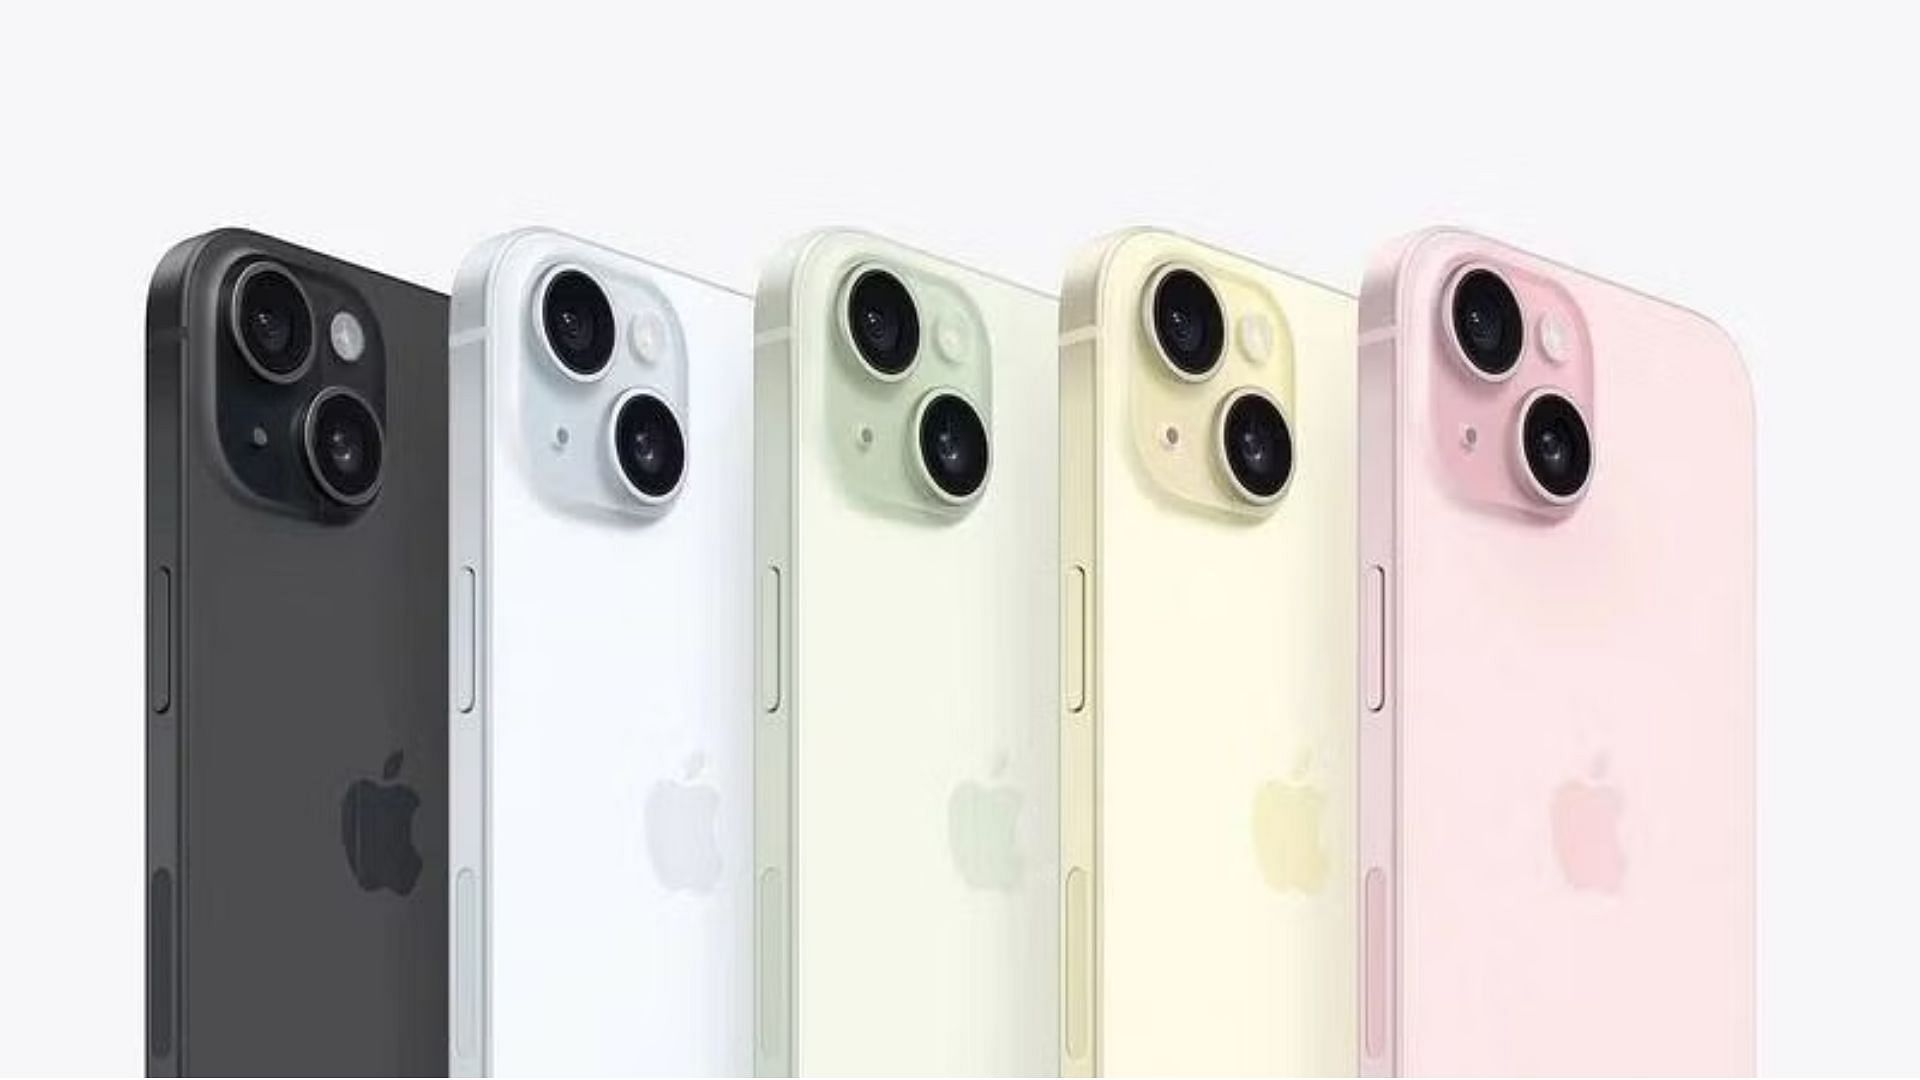 Colorways of the new iPhone (Image via Apple)